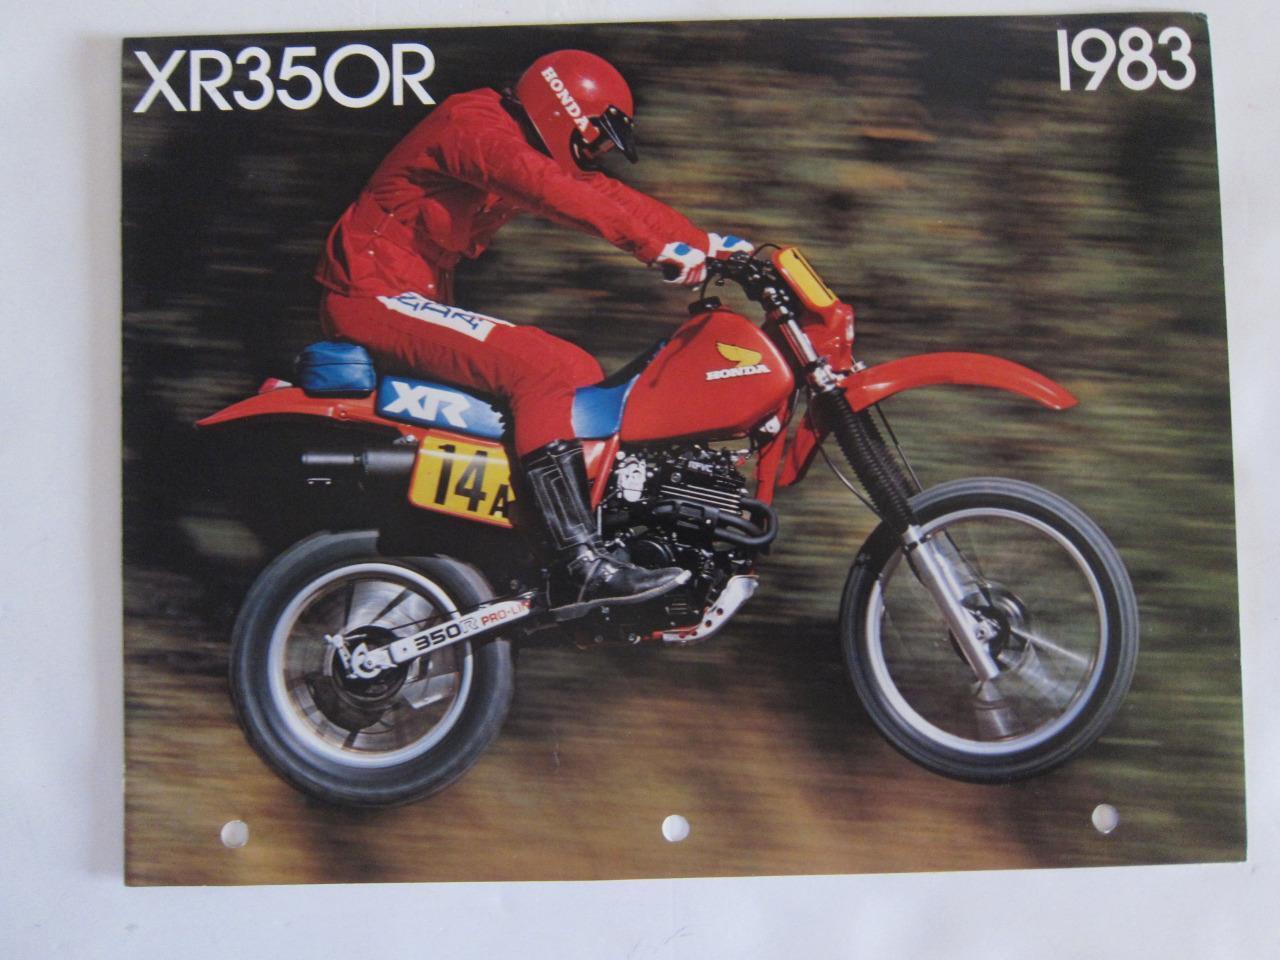 HONDA motorcycle brochure XR 350 R Uncirculated quality color pictures 1983